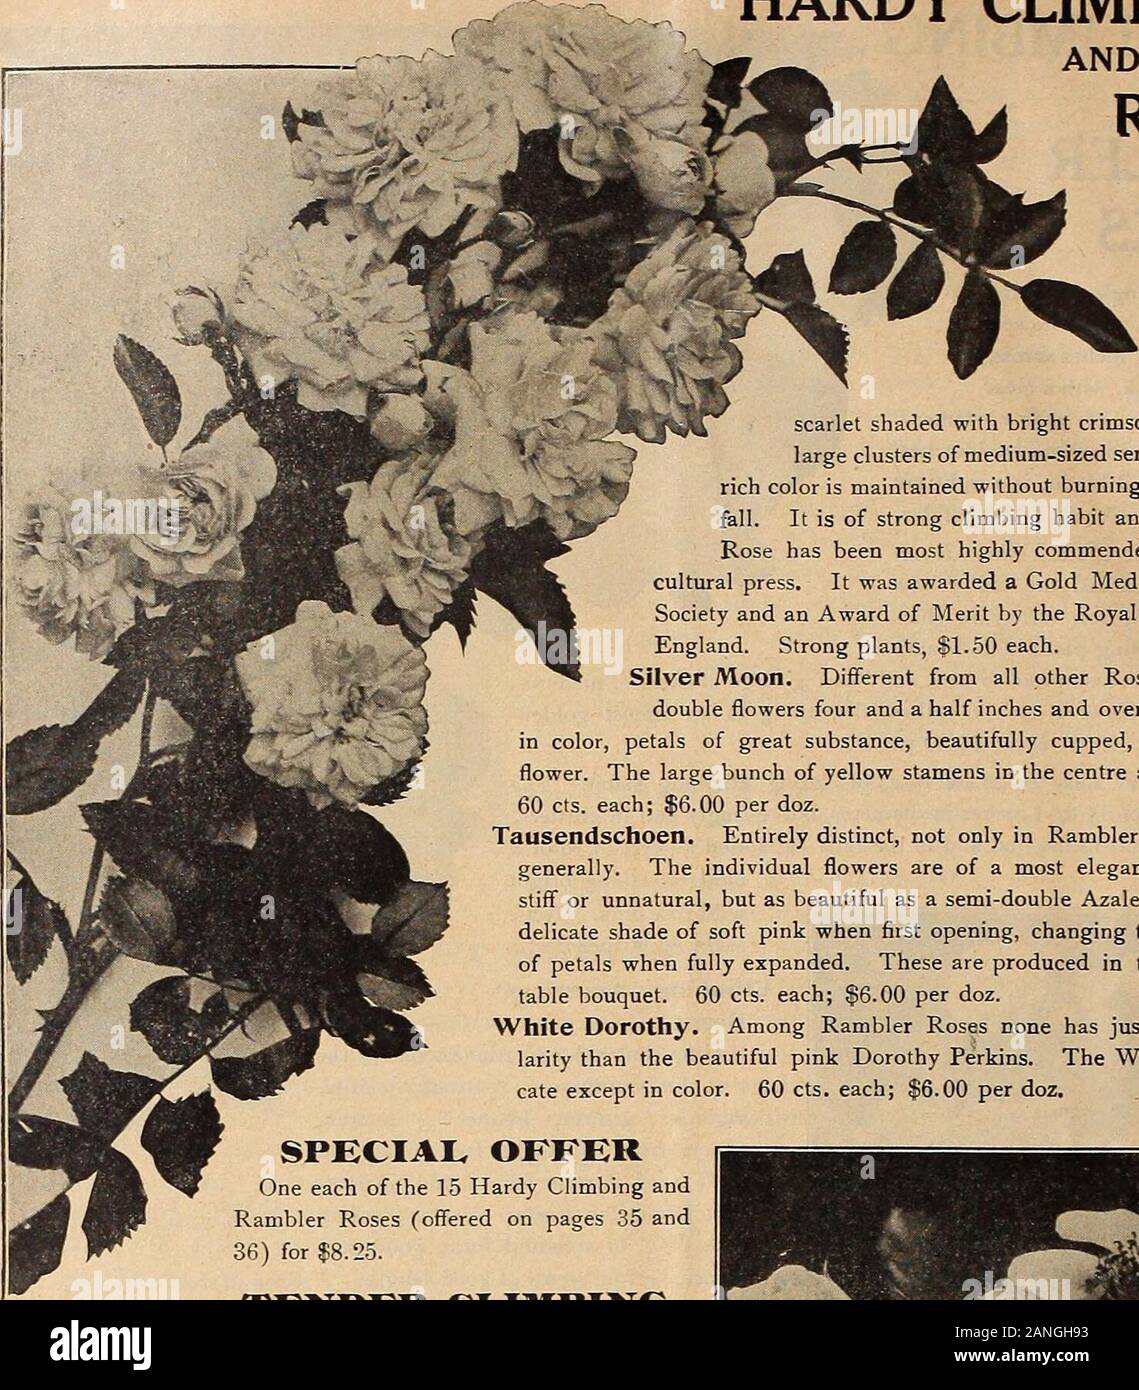 Dreer's mid-summer list 1918 . nd. Strong plants, SI. 50 each.Silver Moon. Different from all other Roses, with beautiful semi-double flowers four and a half inches and over in diameter; pure whitein color, petals of great substance, beautifully cupped, forming a Clematis-likeflower. The large bunch of yellow stamens in the centre adds to its attractiveness.60 cts. each; $6.00 per doz.Tausendschoen. Entirely distinct, not only in Ramblers, but in climbing Rosesgenerally. The individual flowers are of a most elegant and graceful form, notstiff or unnatural, but as beautiful as a semi-double Aza Stock Photo